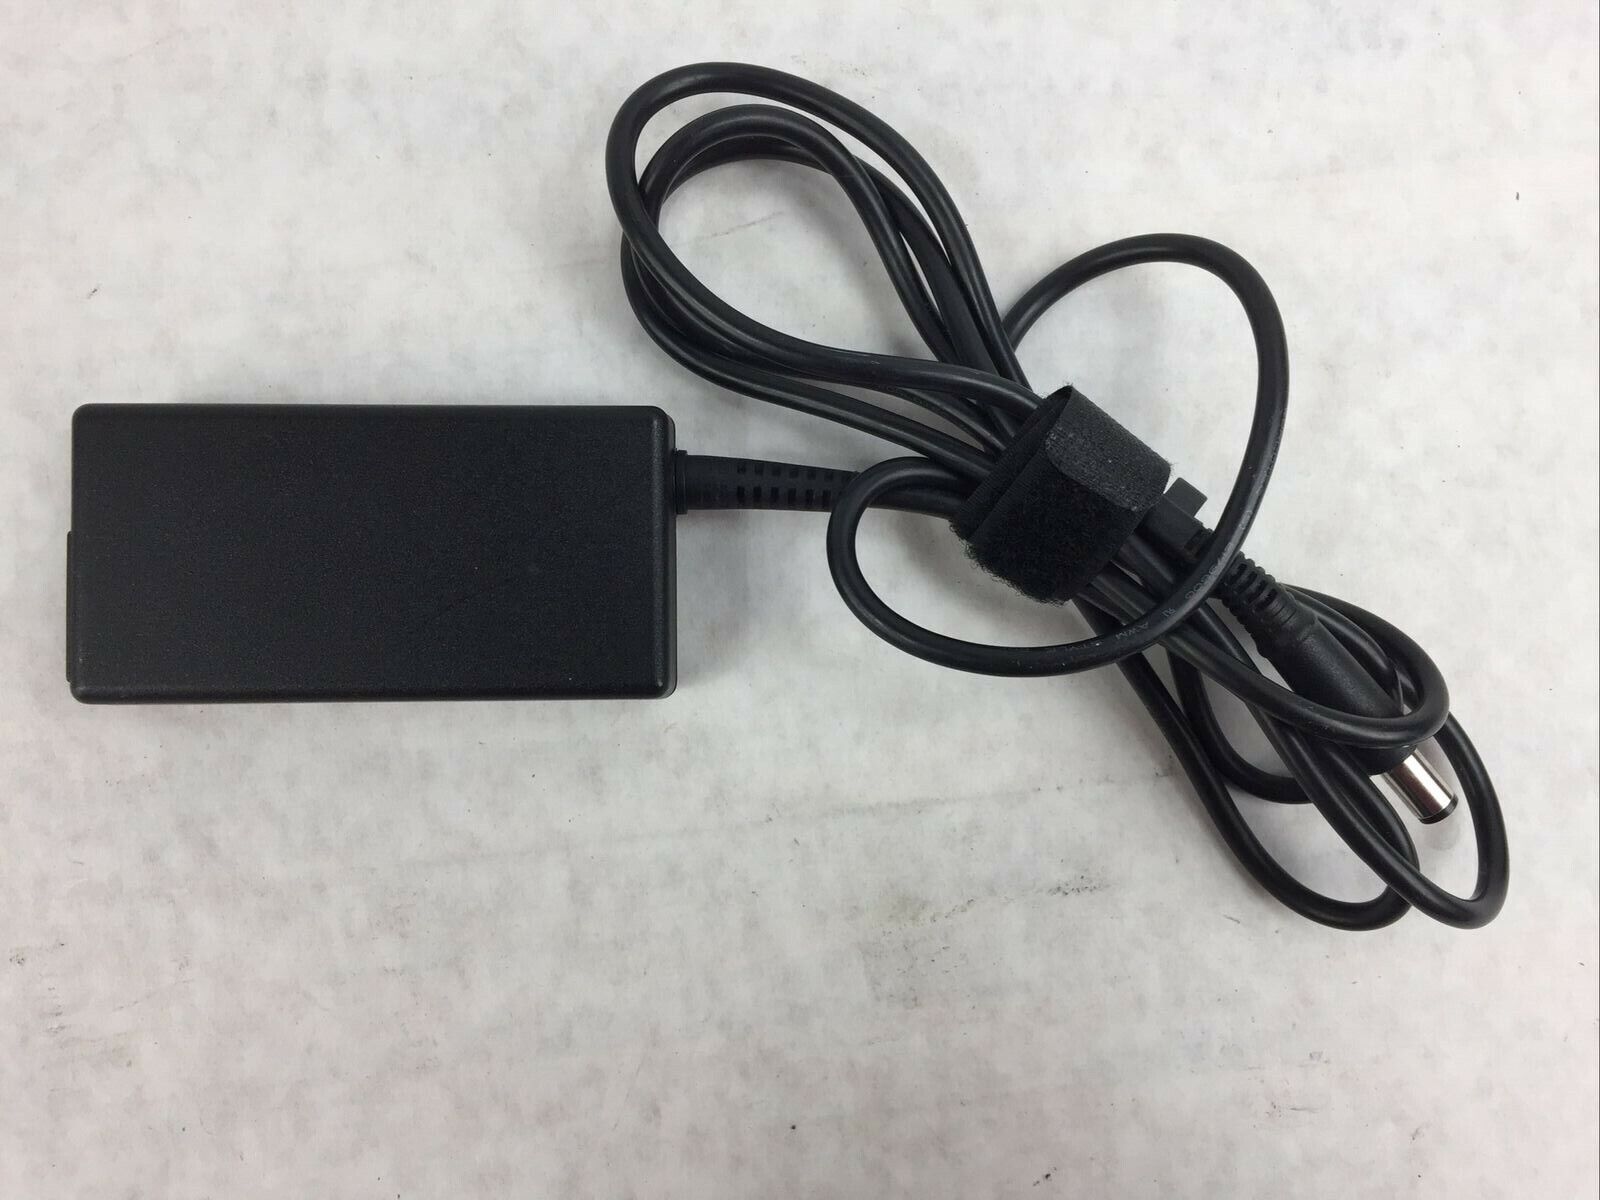 OEM 45W 19.5V Adapter Laptop Charger for HP Pavilion x360 HSTNN-LA35 Power Cord